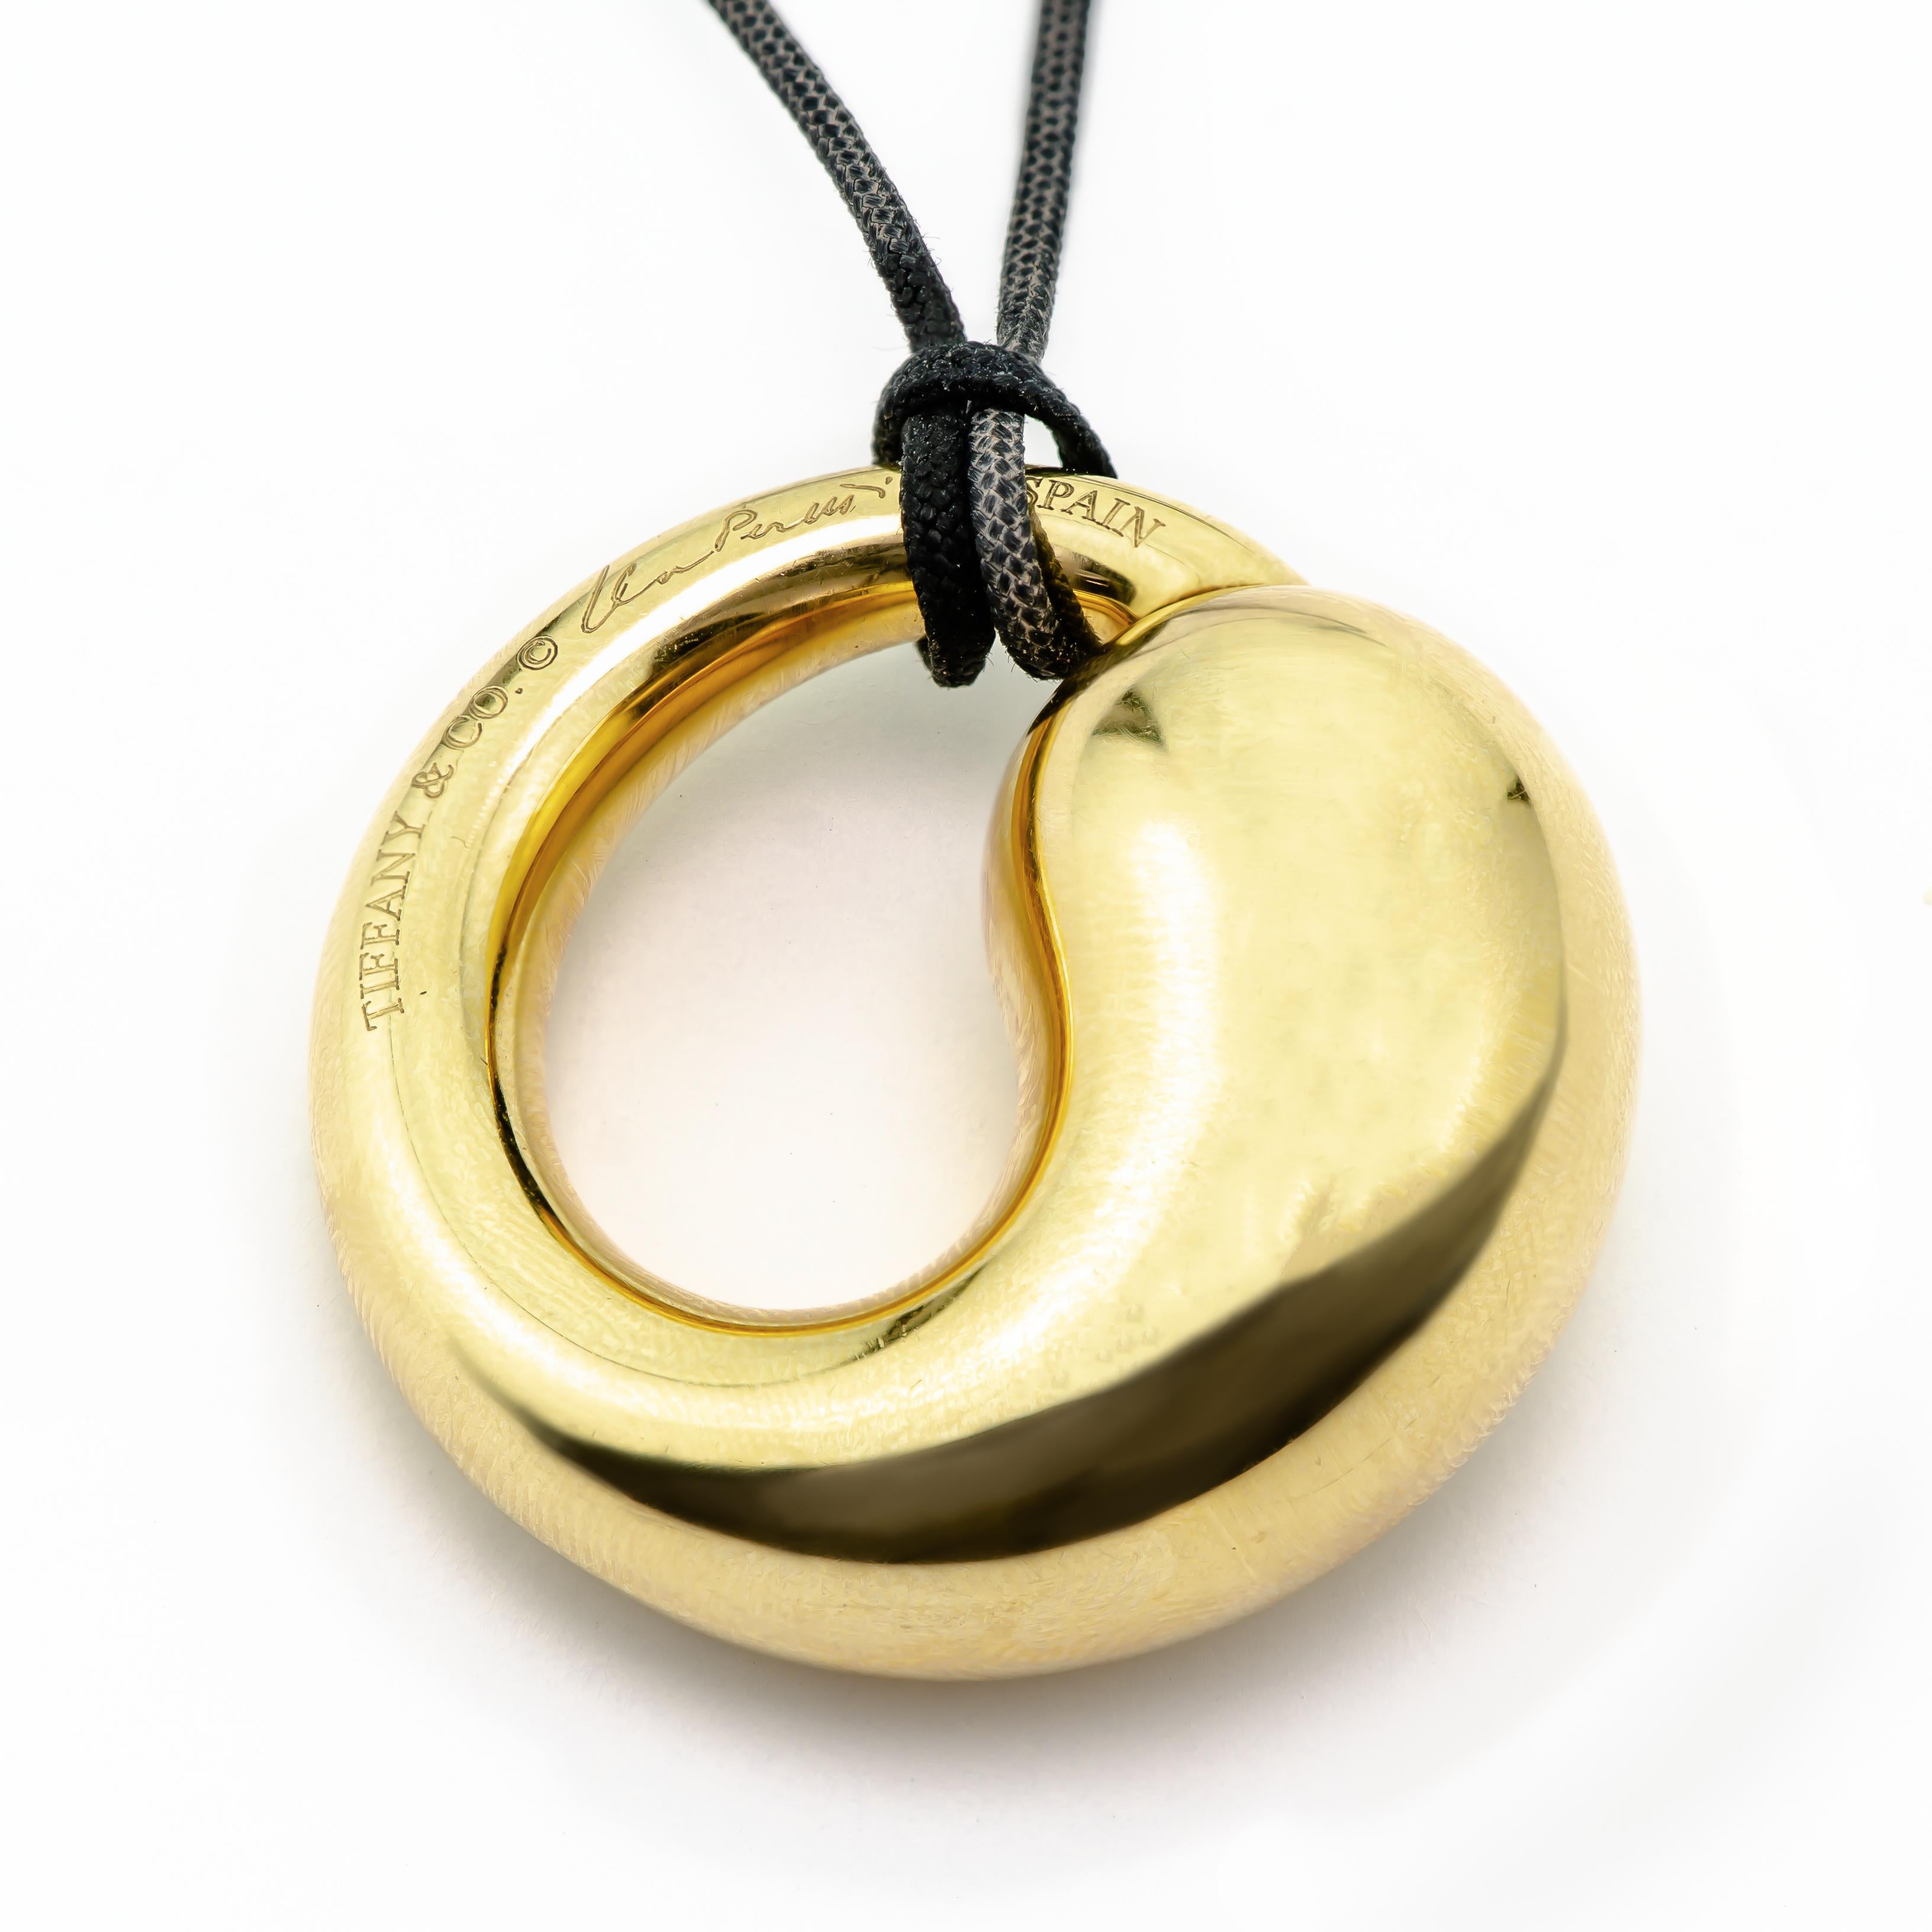 Exquisite Tiffany & Co. Elsa Peretti Large Size Eternal Circle rendered in 18K yellow gold on black cord.  Excellent condition.  All hallmarked and signed.  Pendant in 18k gold. On a 30